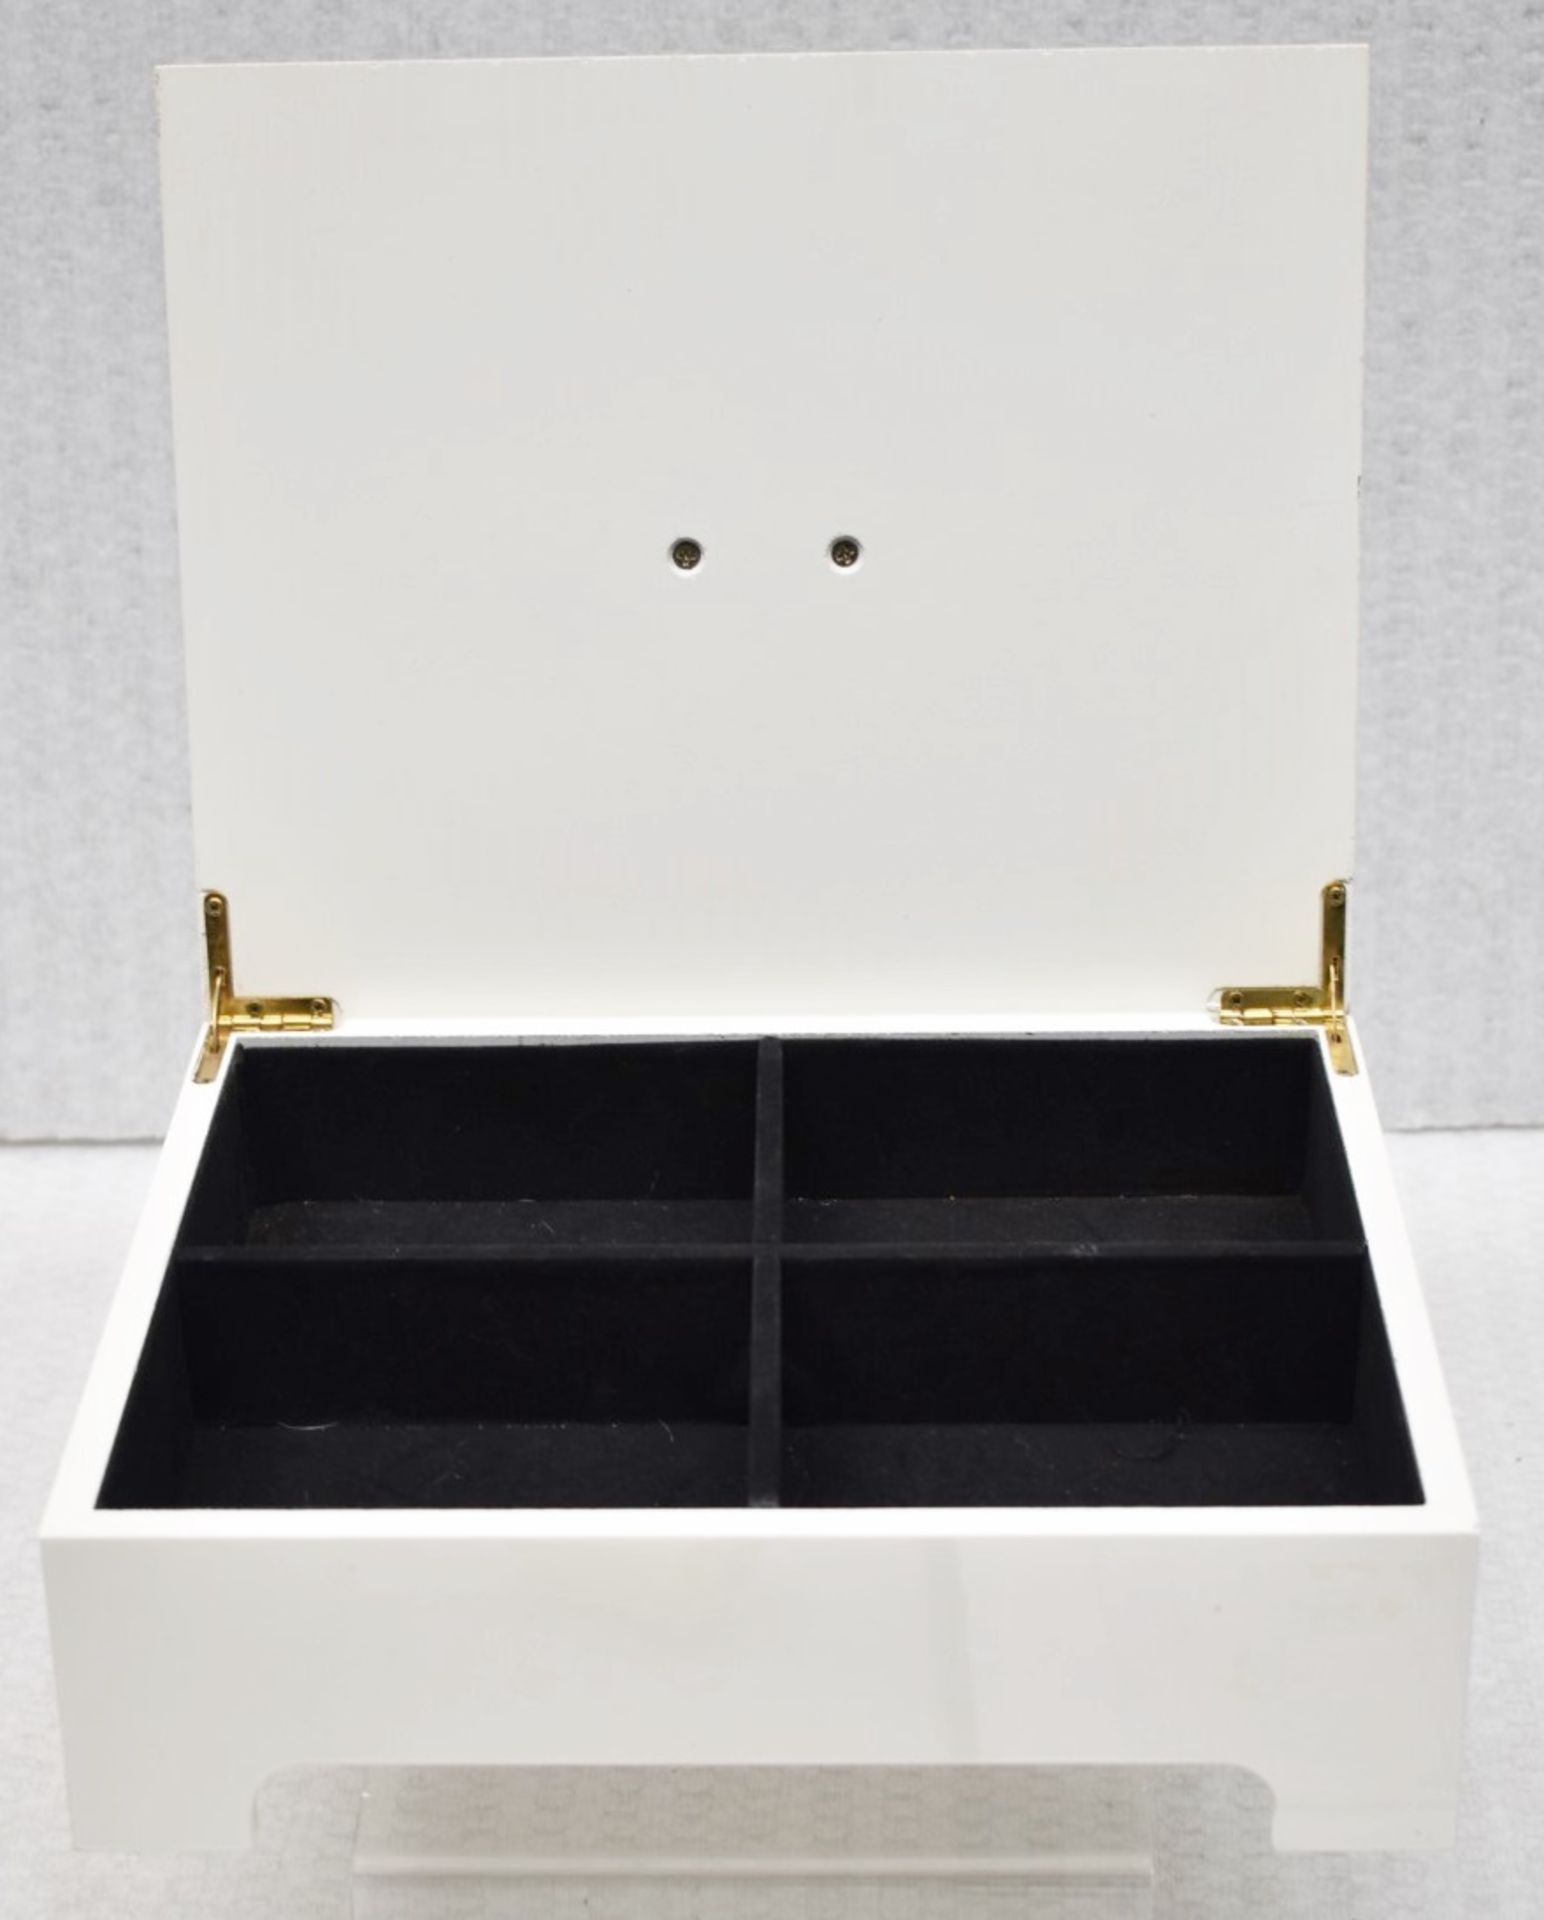 1 x Designer-style Jewellery Box In Cream With Statement Handle - Ref: CNT761/WH2/C23 - CL845 - NO - Image 3 of 4